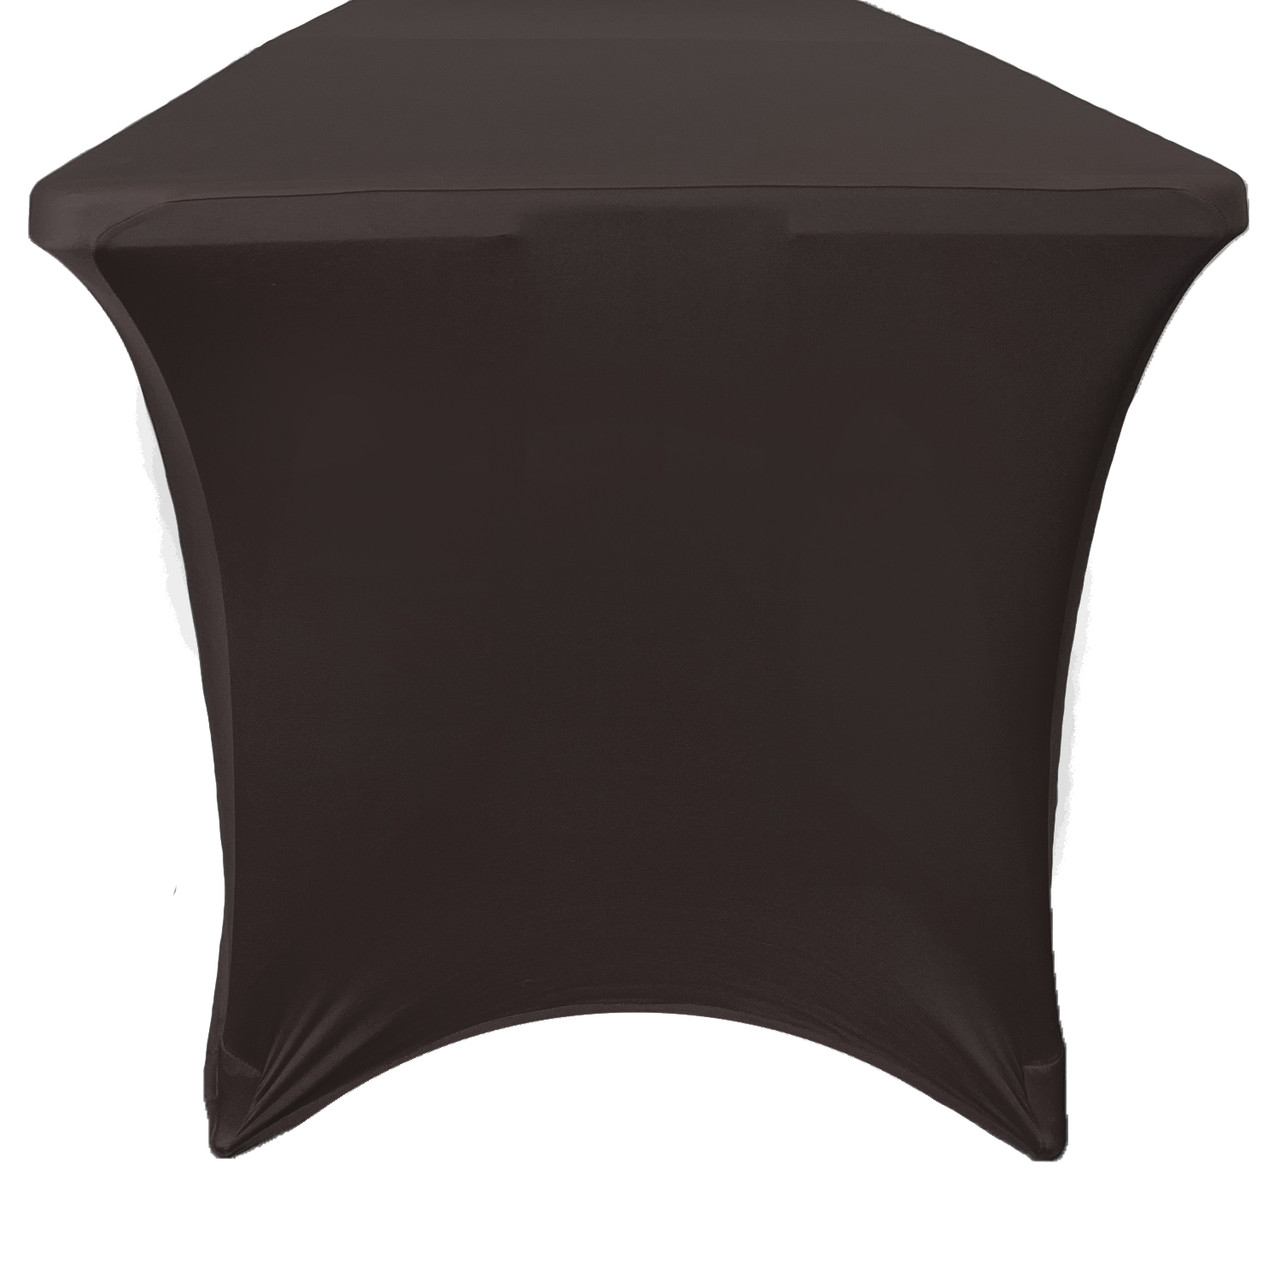 Stretch Spandex 8 ft Rectangular Table Cover Black - Your Chair Covers Inc.